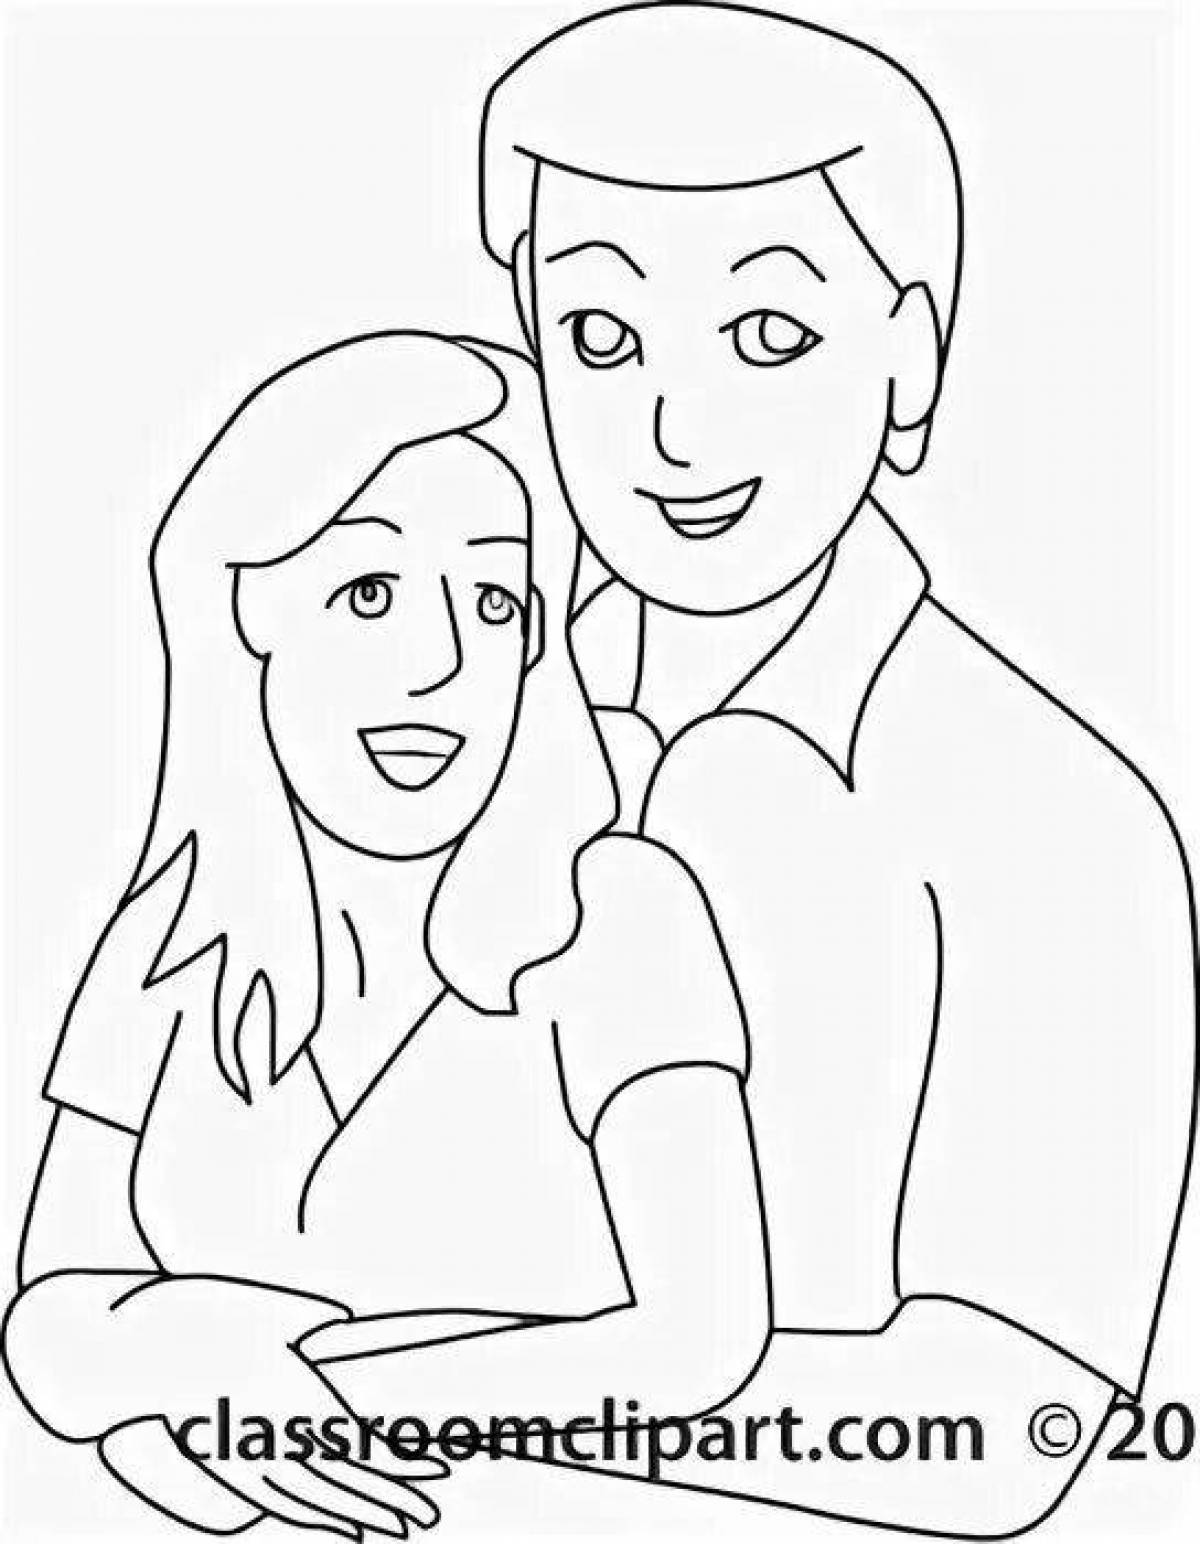 Coloring page serene wife and husband